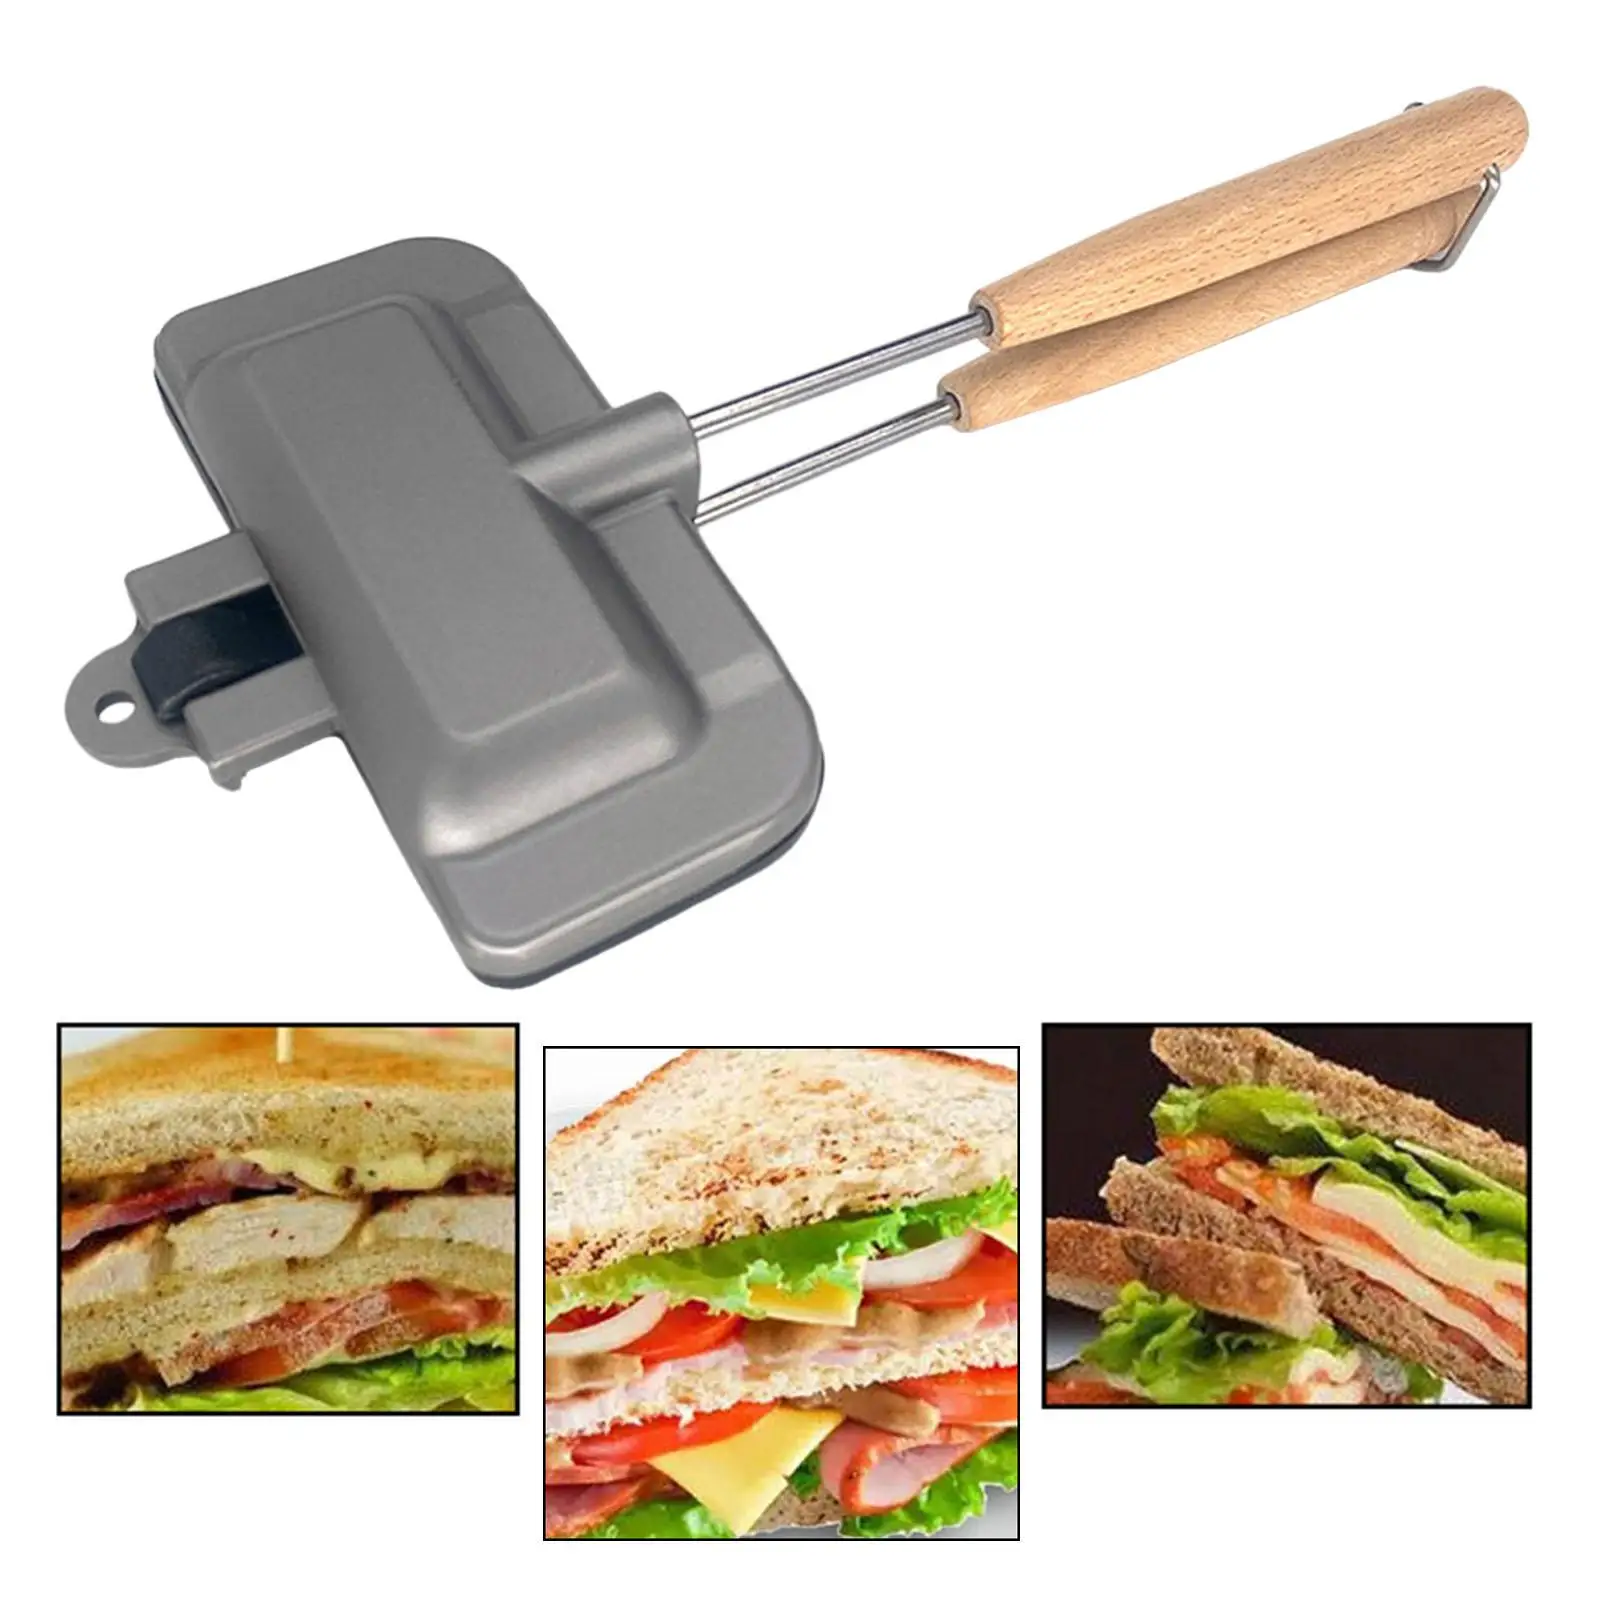 Multifunction Sandwich Pan with Handle Plate for Home Dining Room Kitchen